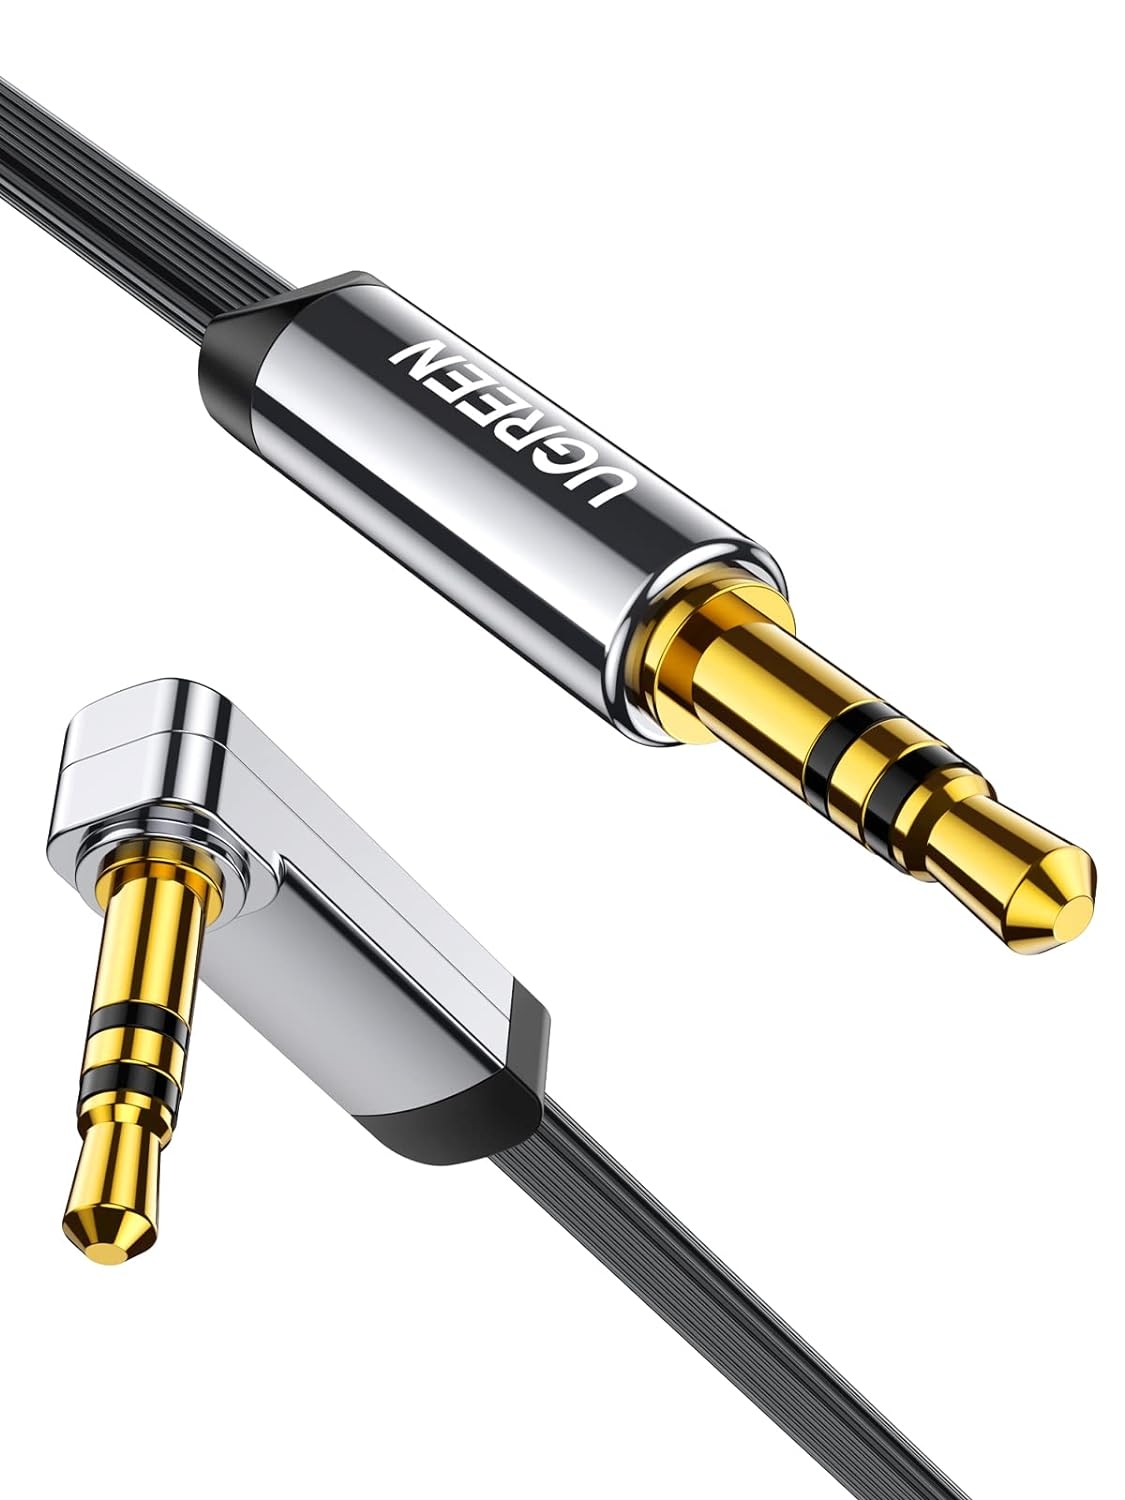 UGREEN 3.5mm aux Audio Jack Cable 90° for Apple iPhone, Samsung, smartphones | 24K gold plated